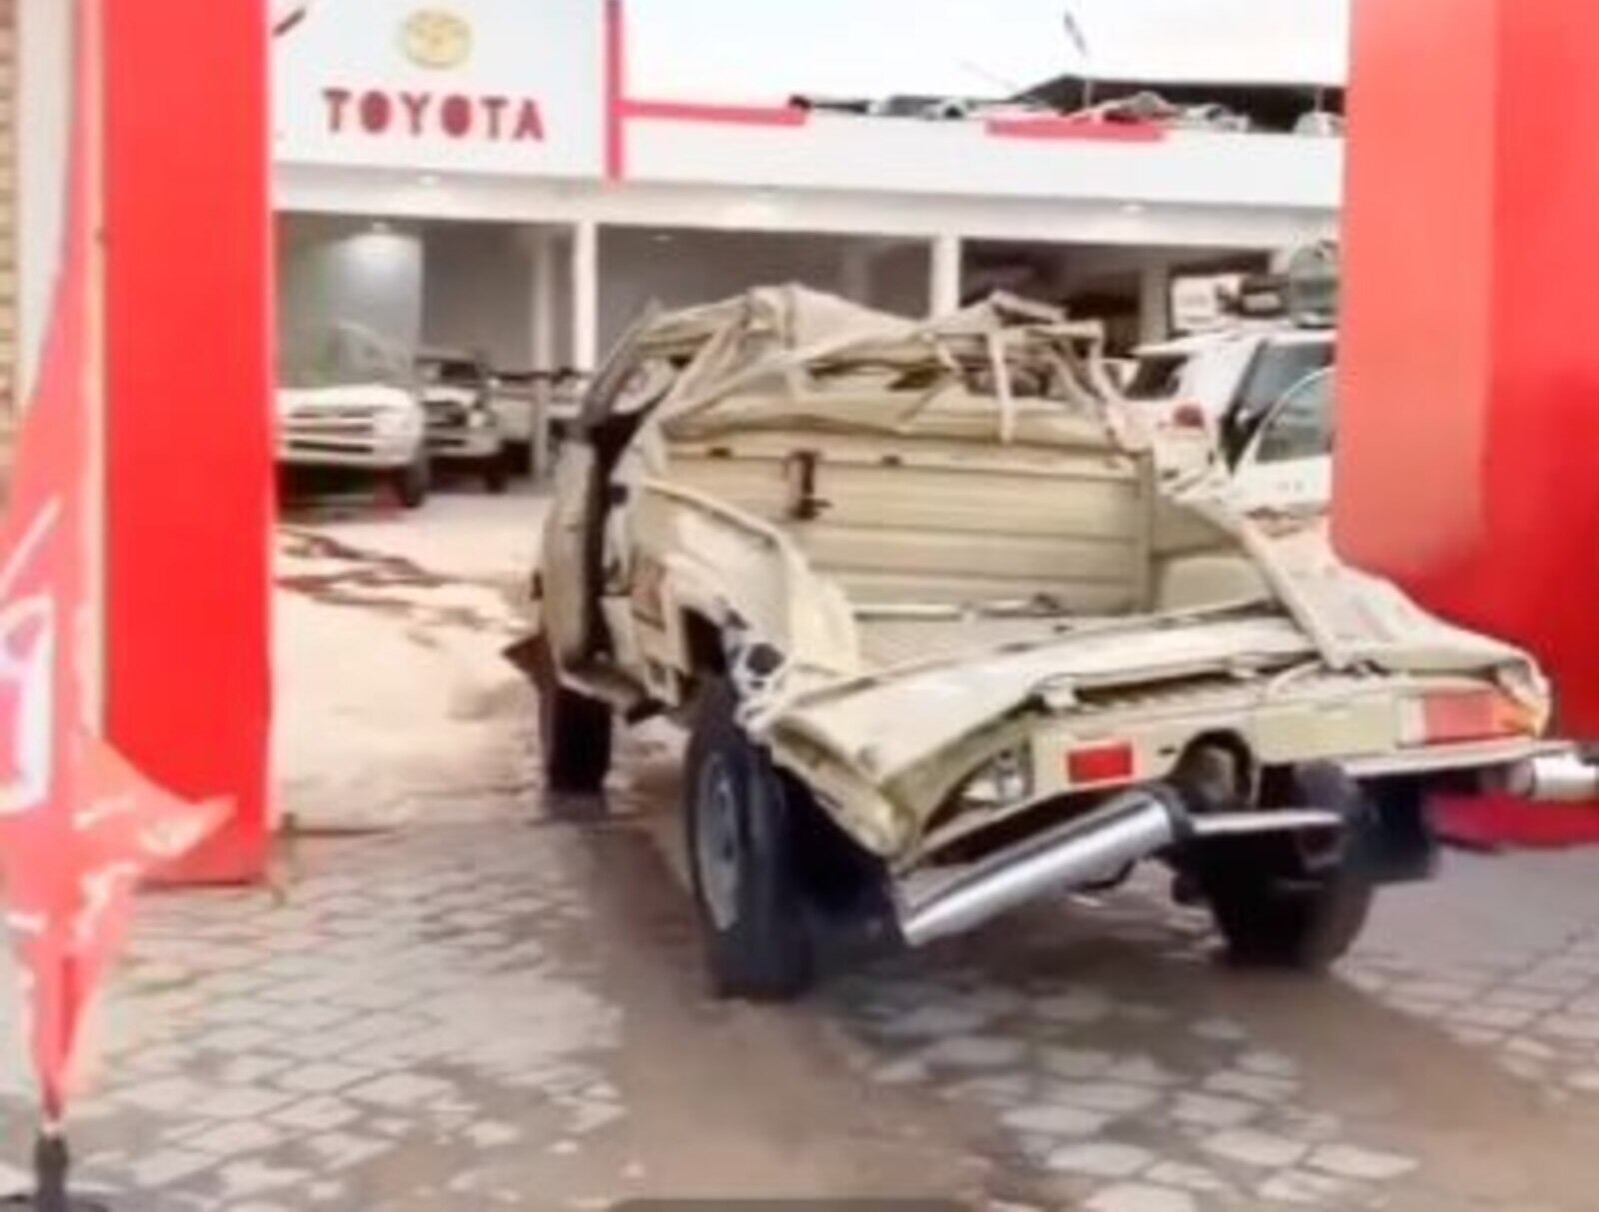 1984 Toyota Land Cruiser Series 70 truck after rolling down a mountain.